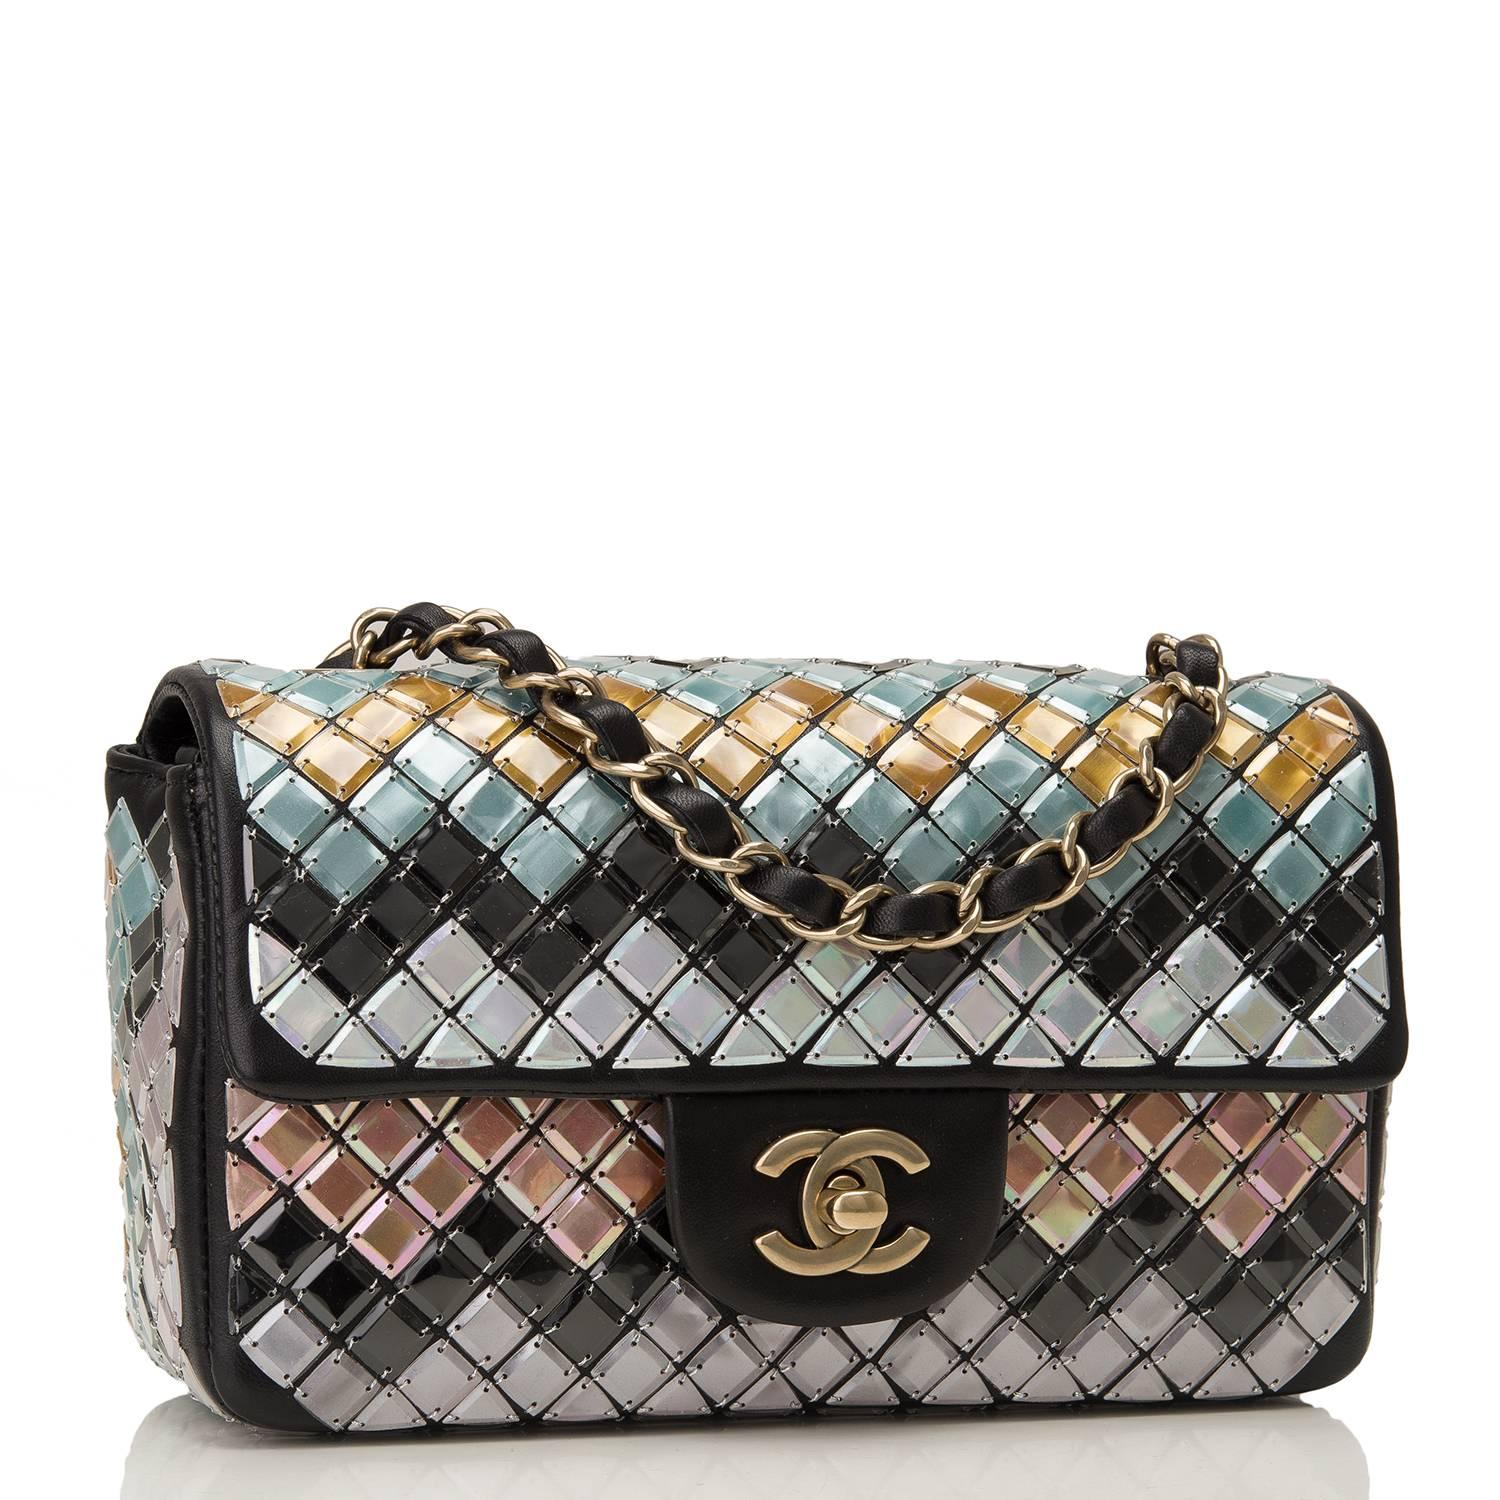 Chanel Mosaic Embroideried Small Flap bag of black lambskin leather with antique gold tone hardware.

This collectible bag from the Brassiere Gabrielle Collection features multicolor mosaic tiles embroidered on the bag by Lesage in an allover